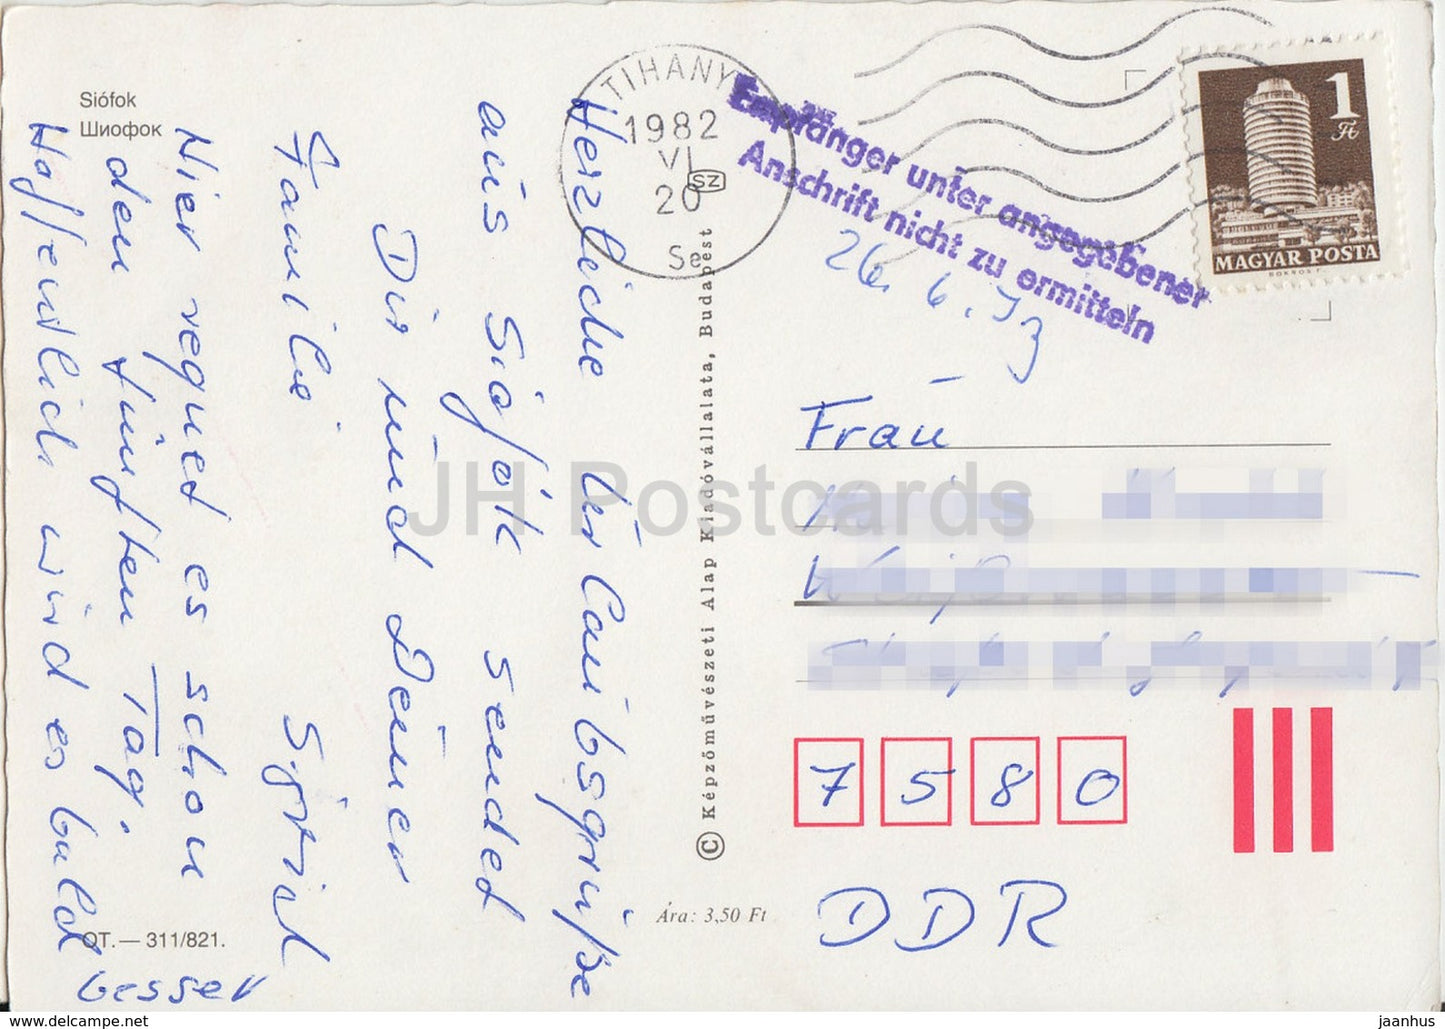 Siofok - hotel - passenger boat - sailing boat - lighthouse - multiview - 1982 - Hungary - used